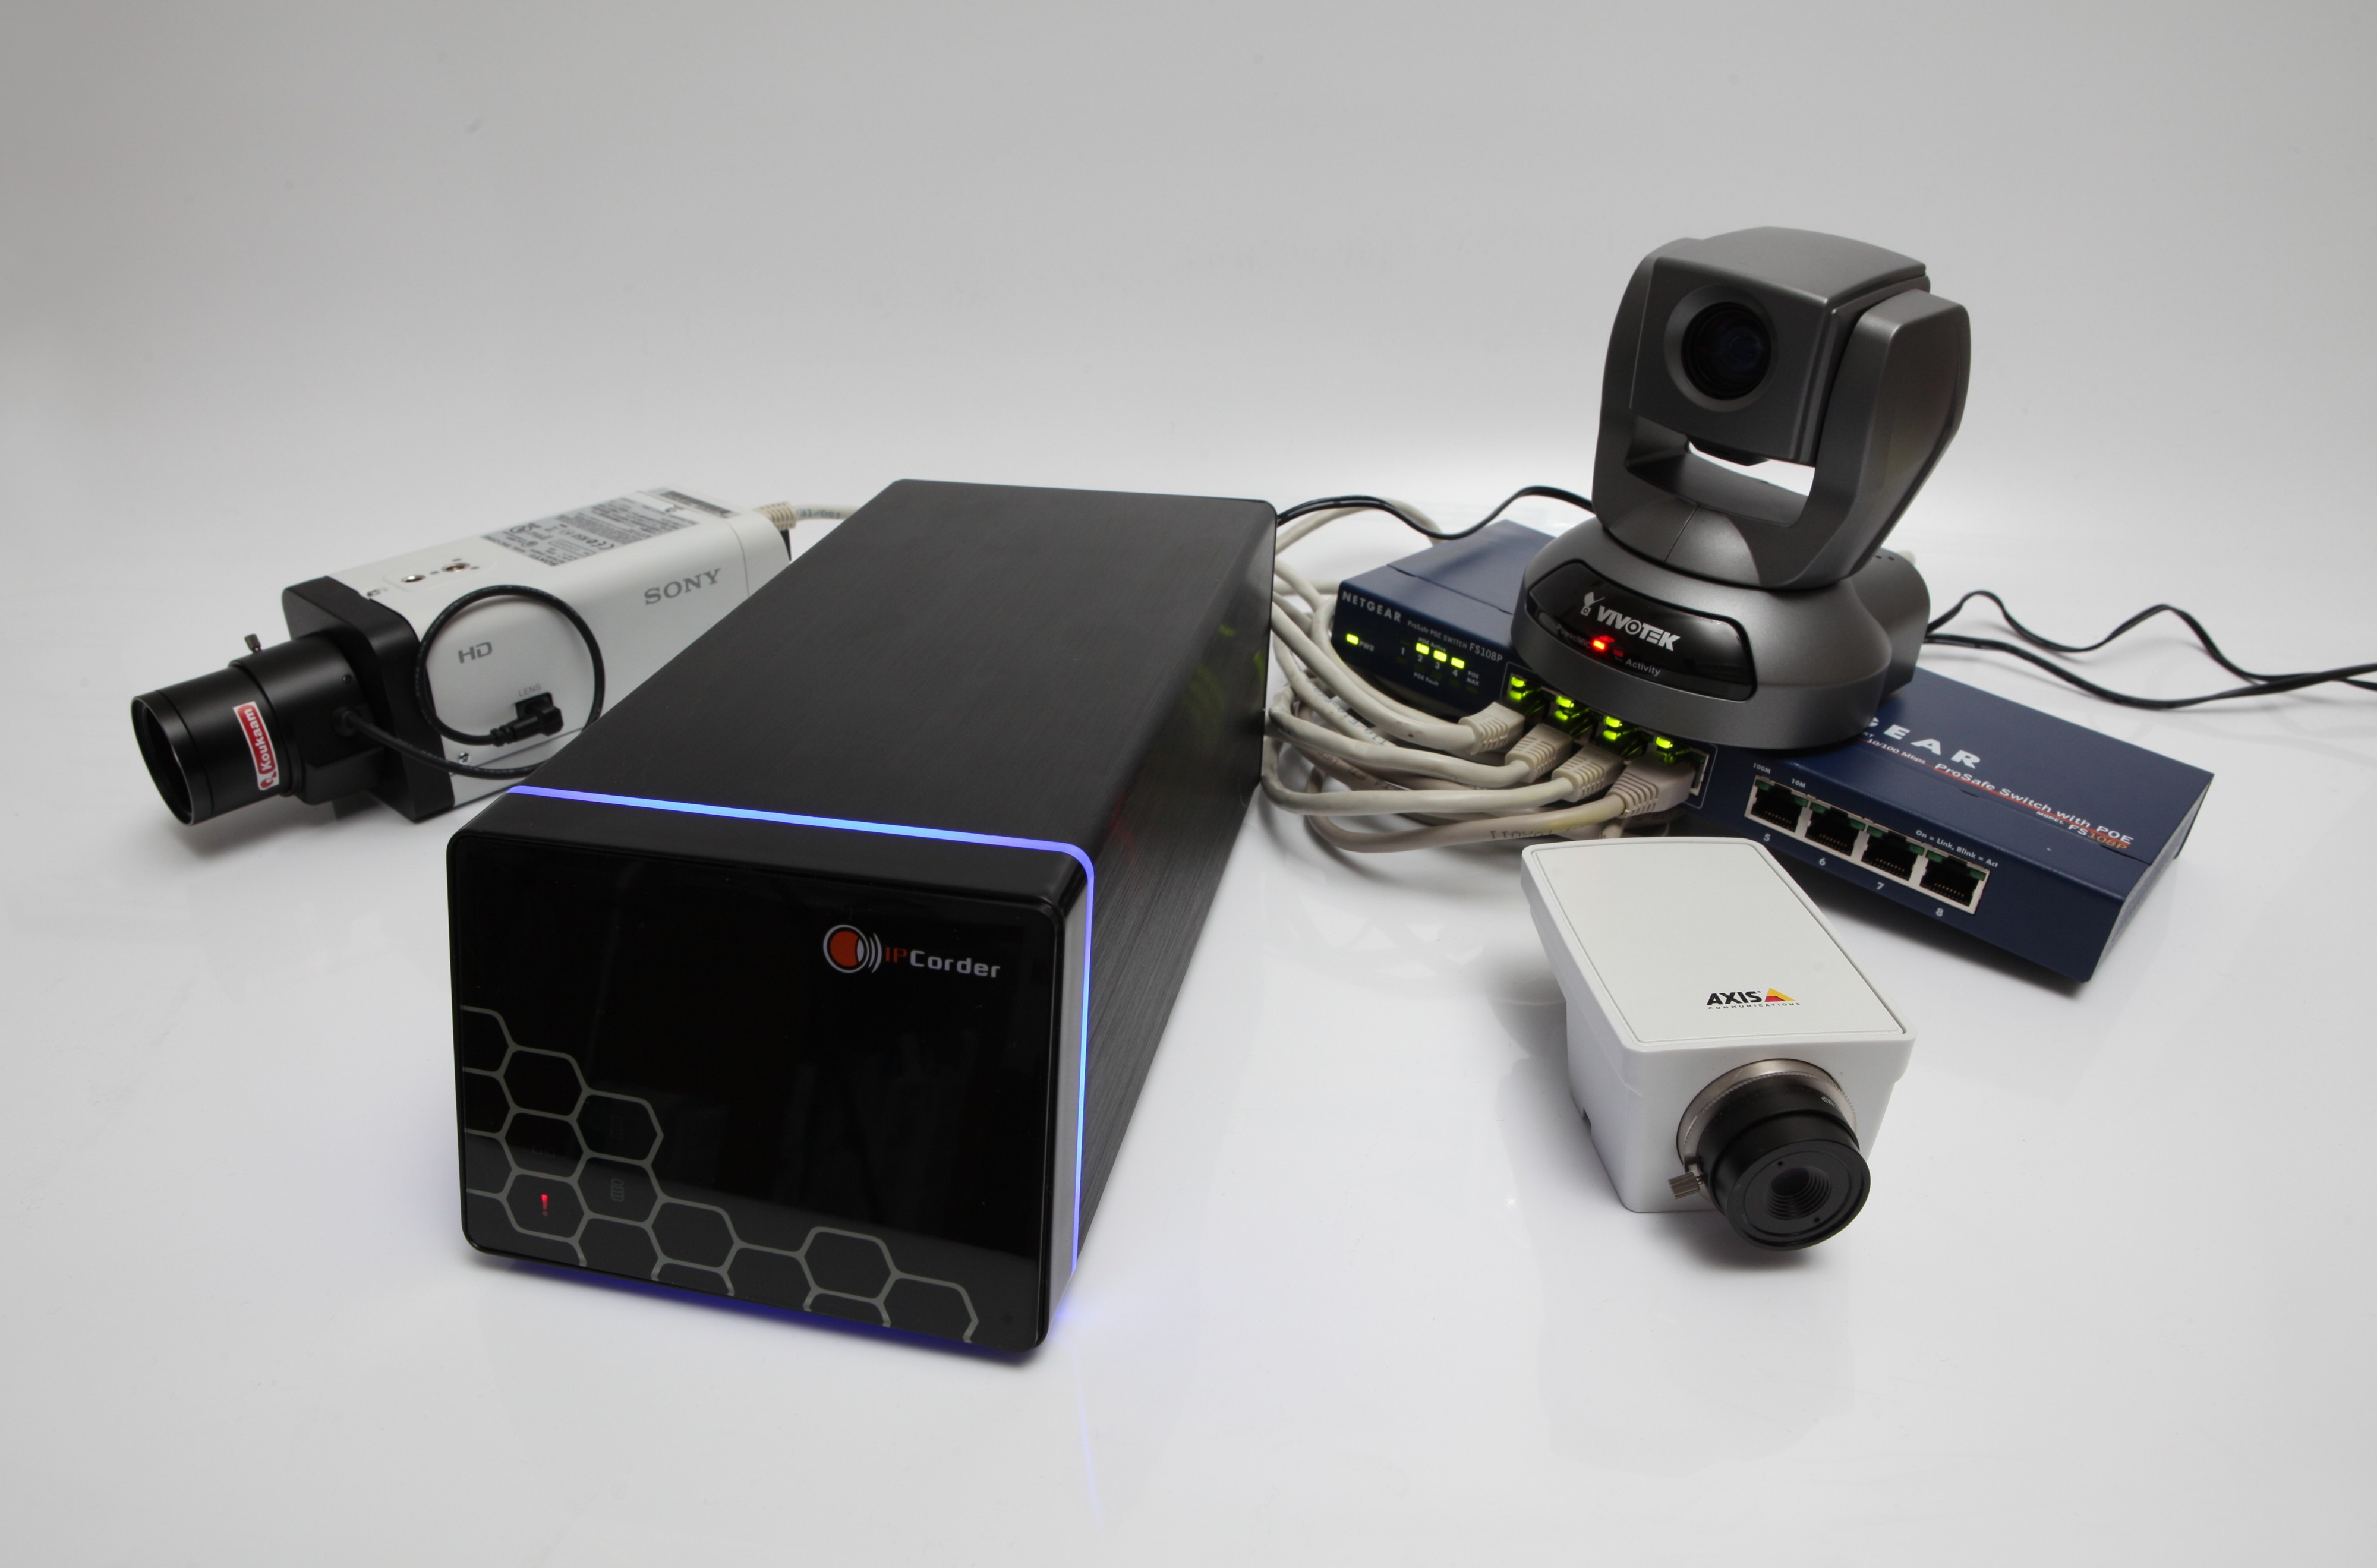 IPCorder NVR with cameras